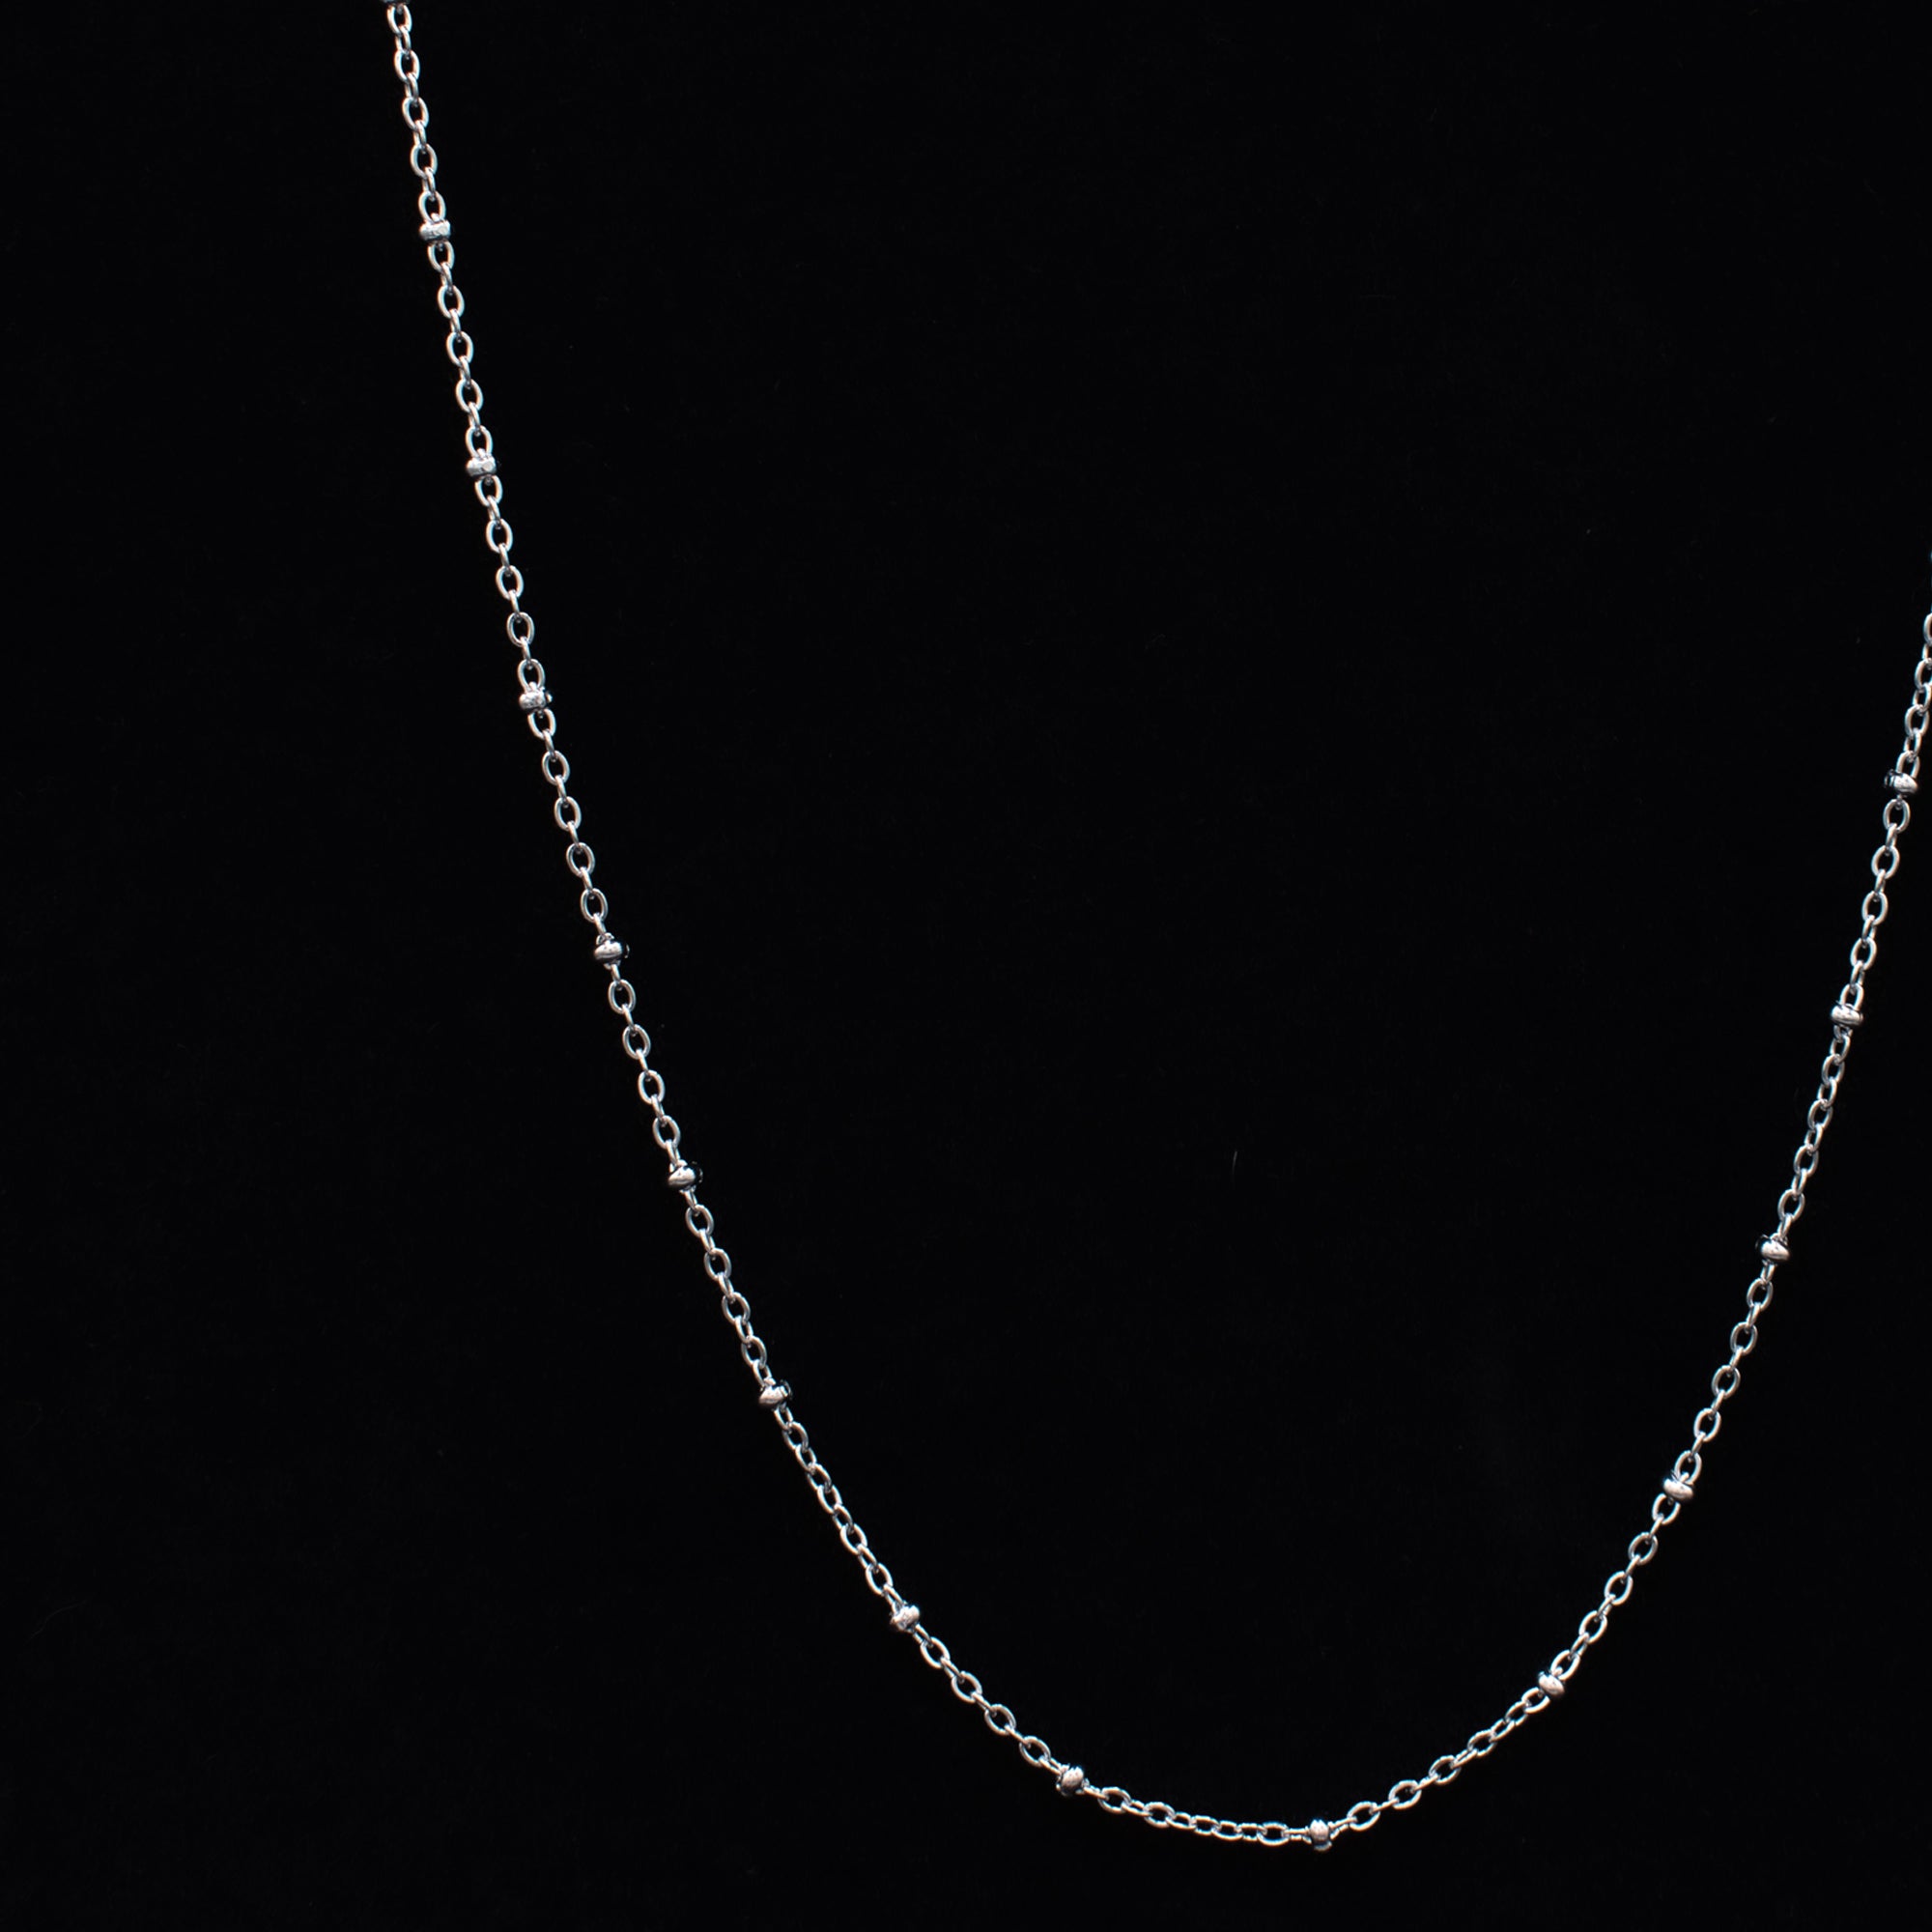 Satellite Cable Chain Necklace - (Silver) 2mm